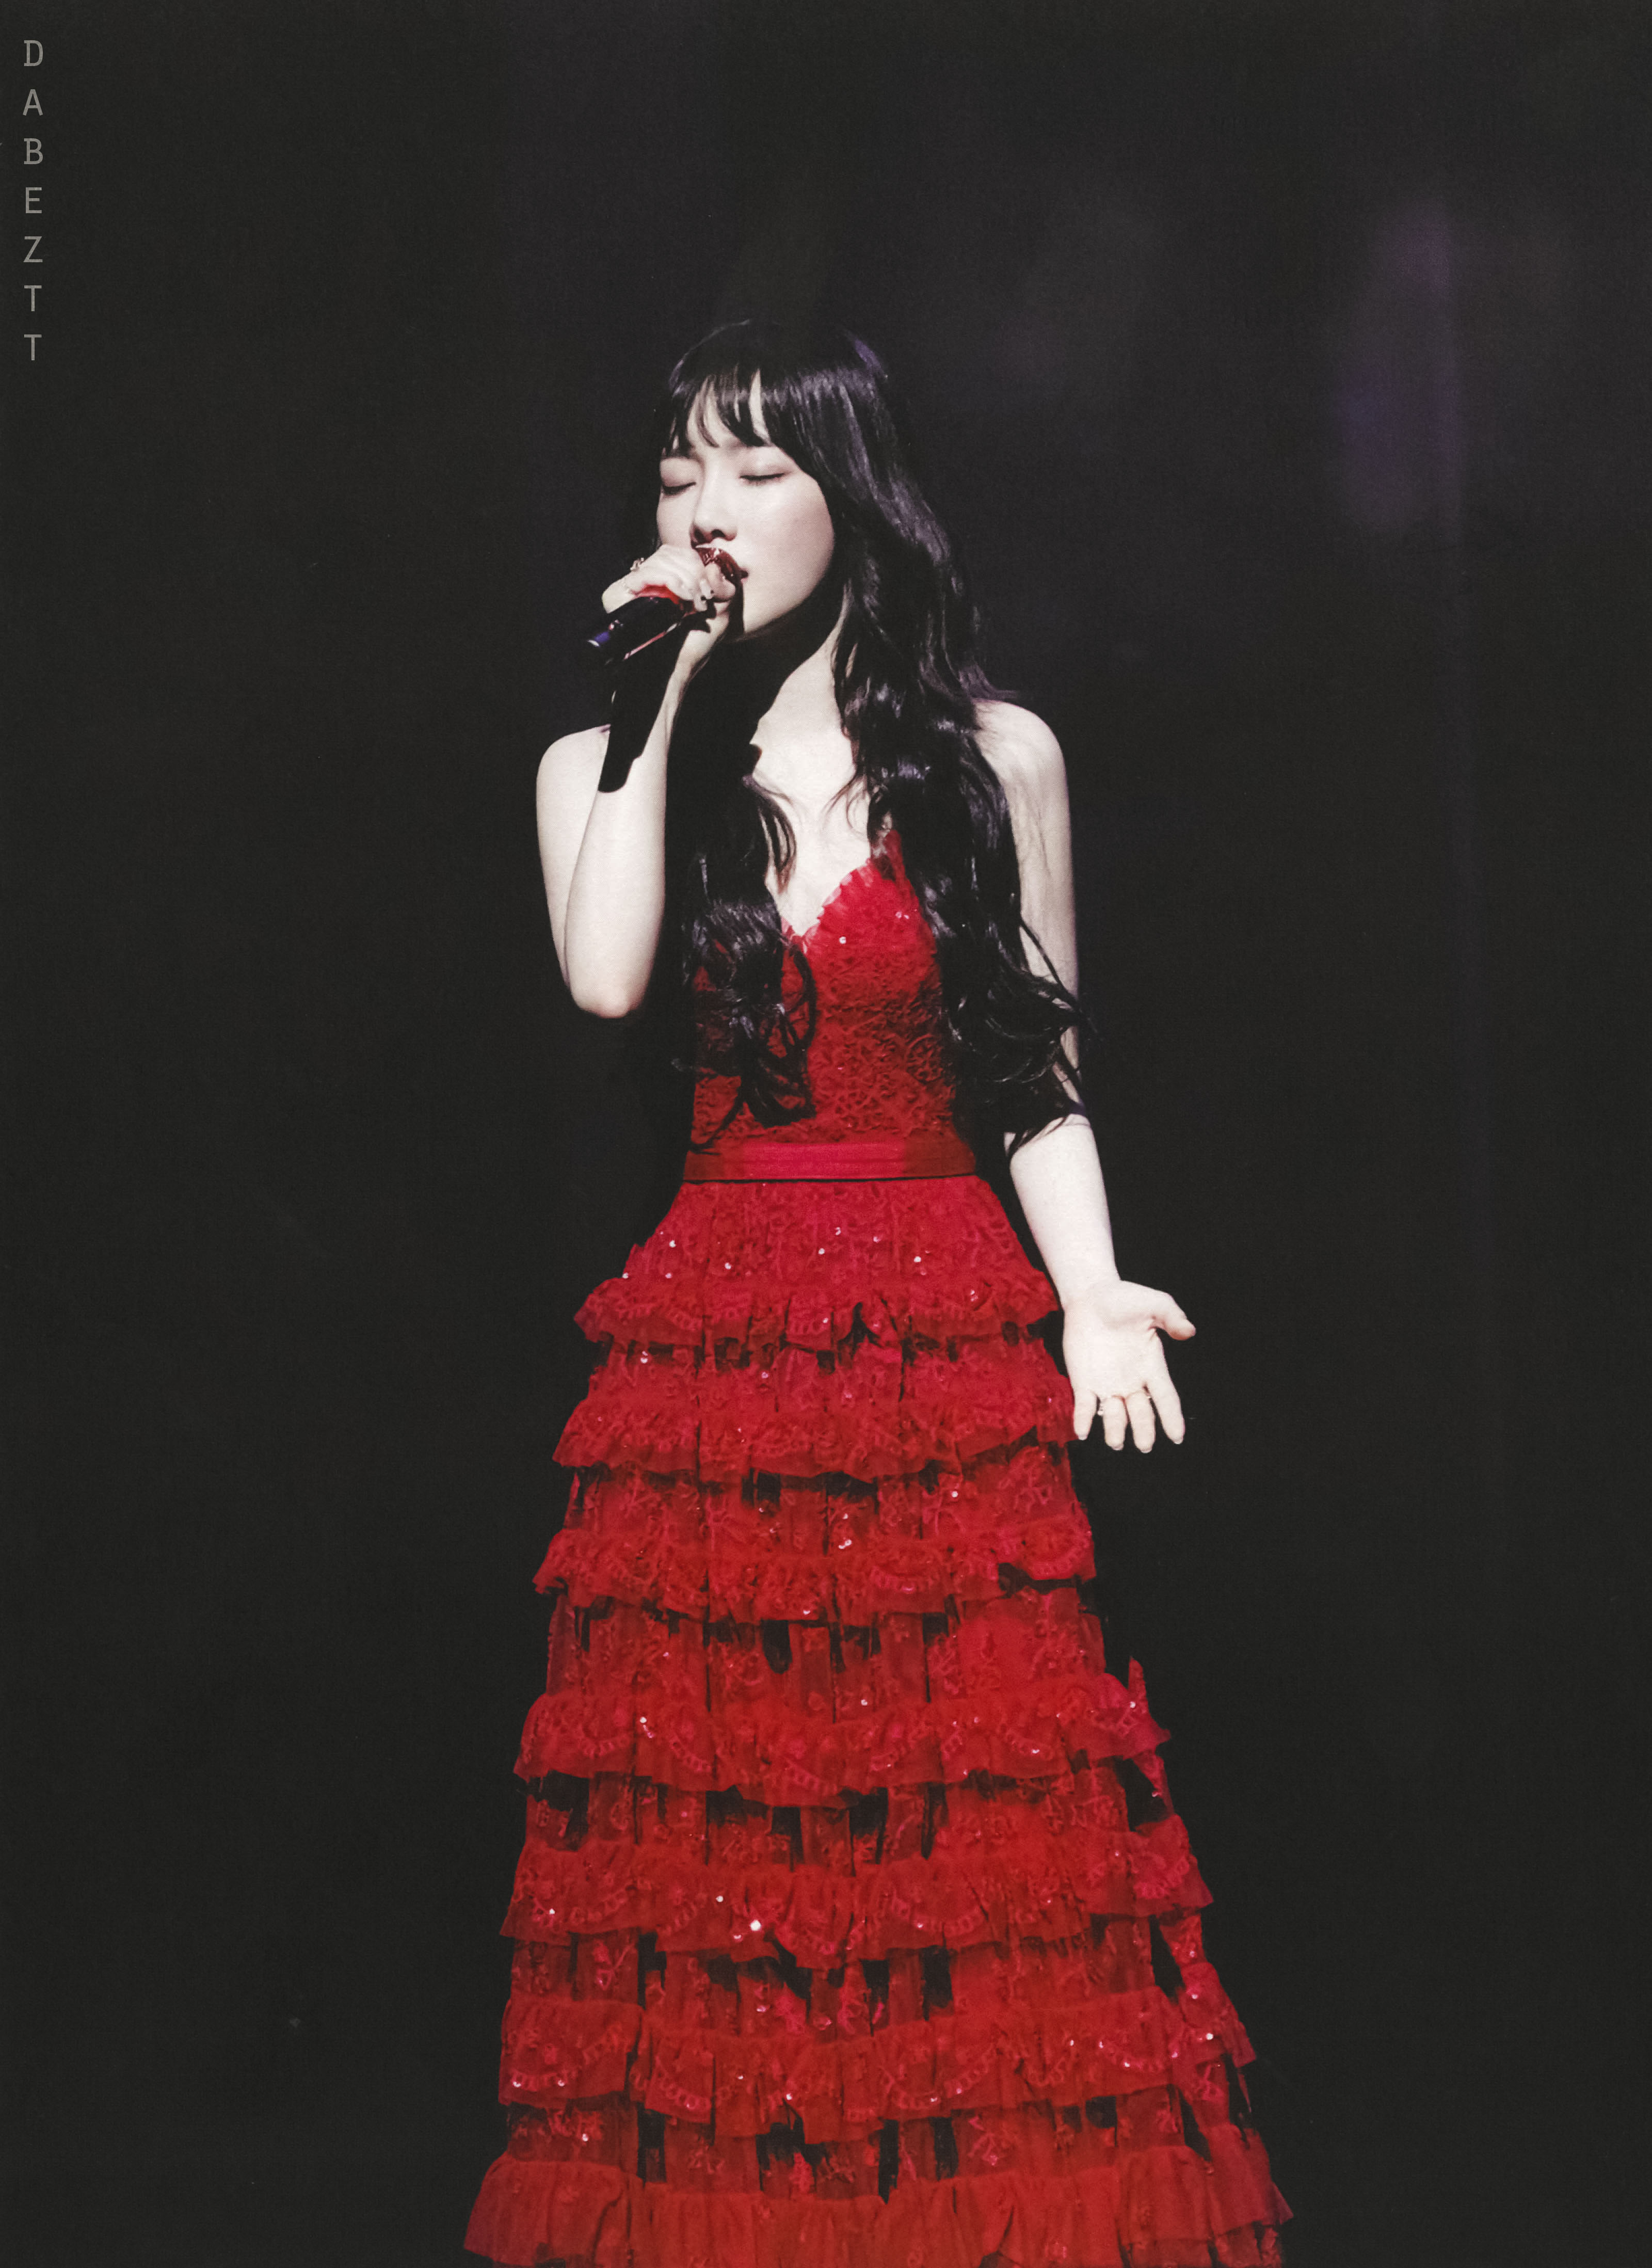 180323 TAEYEON SPECIAL LIVE “The Magic of Christmas Time” DVD 스캔 by Dabeztt (31).jpg